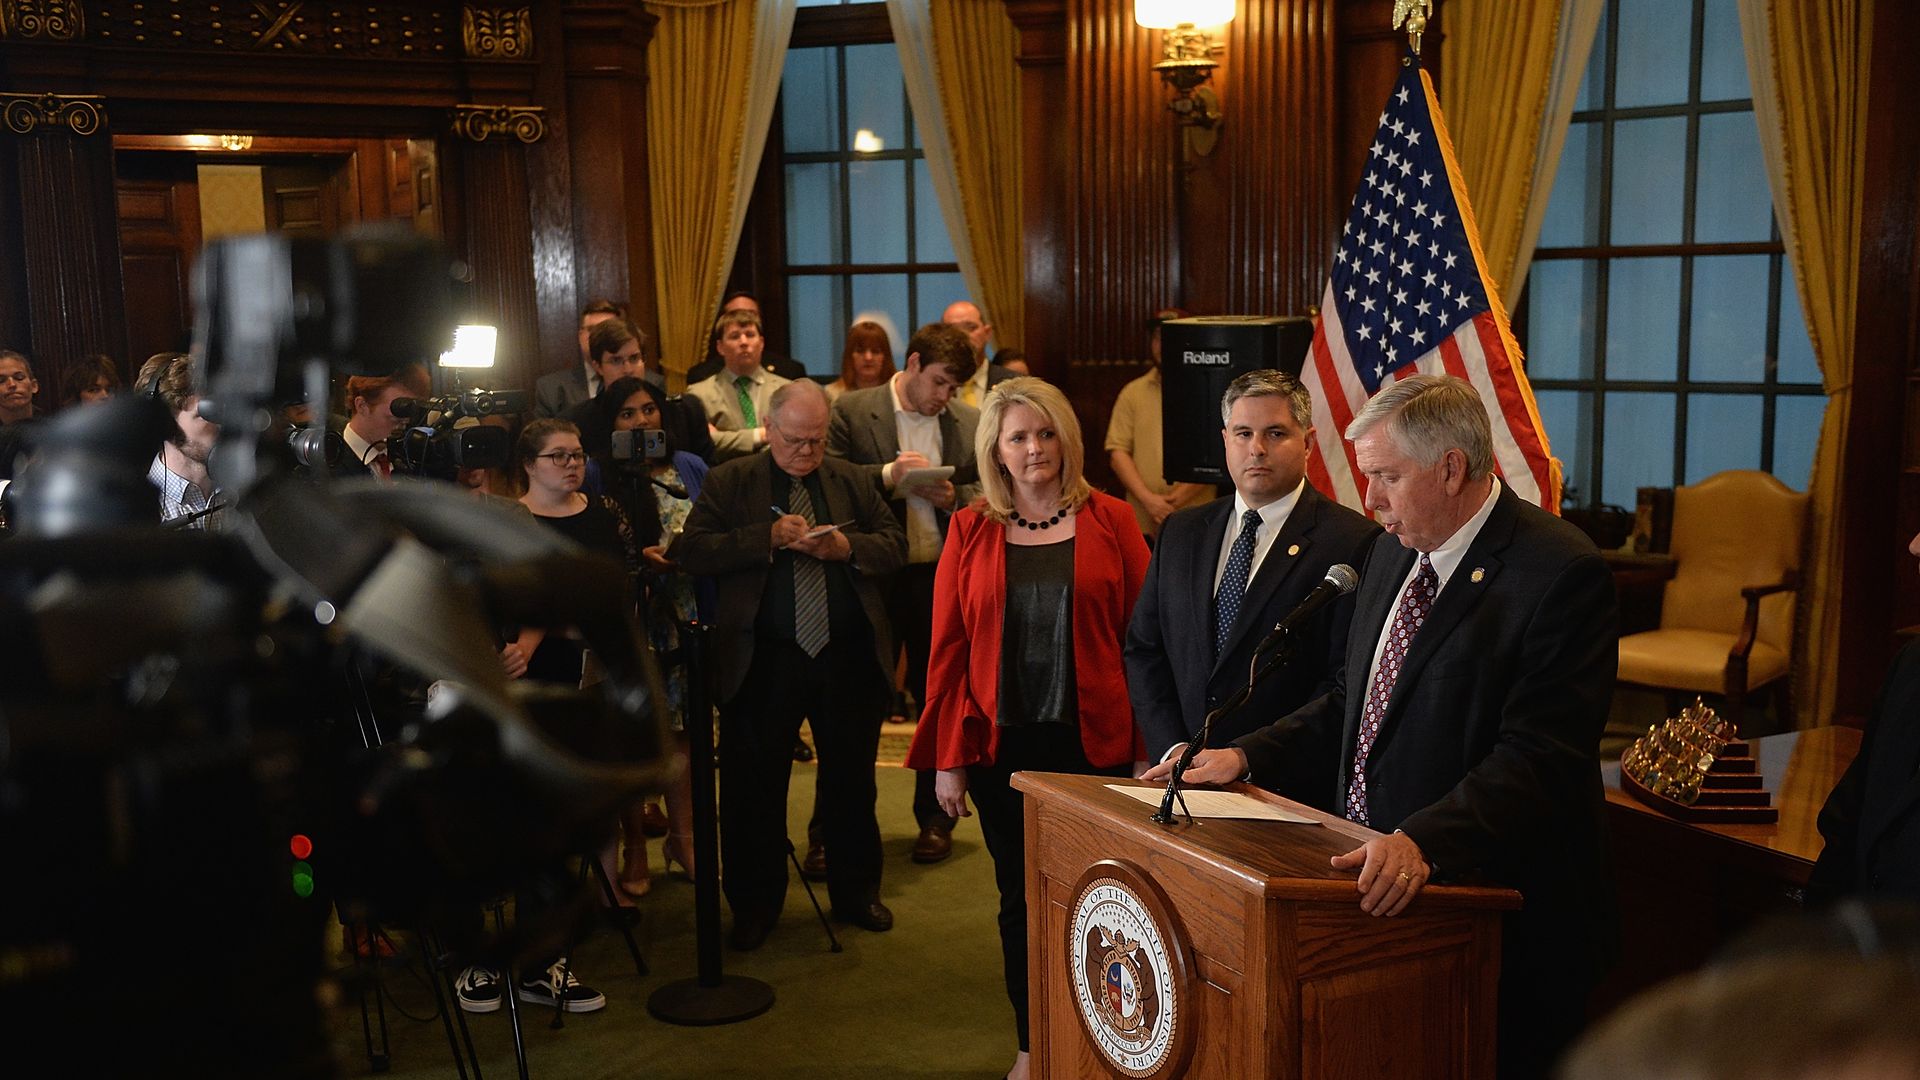 In this image, Michael Parson stands and speaks at a podium in front of a crowd and cameras.